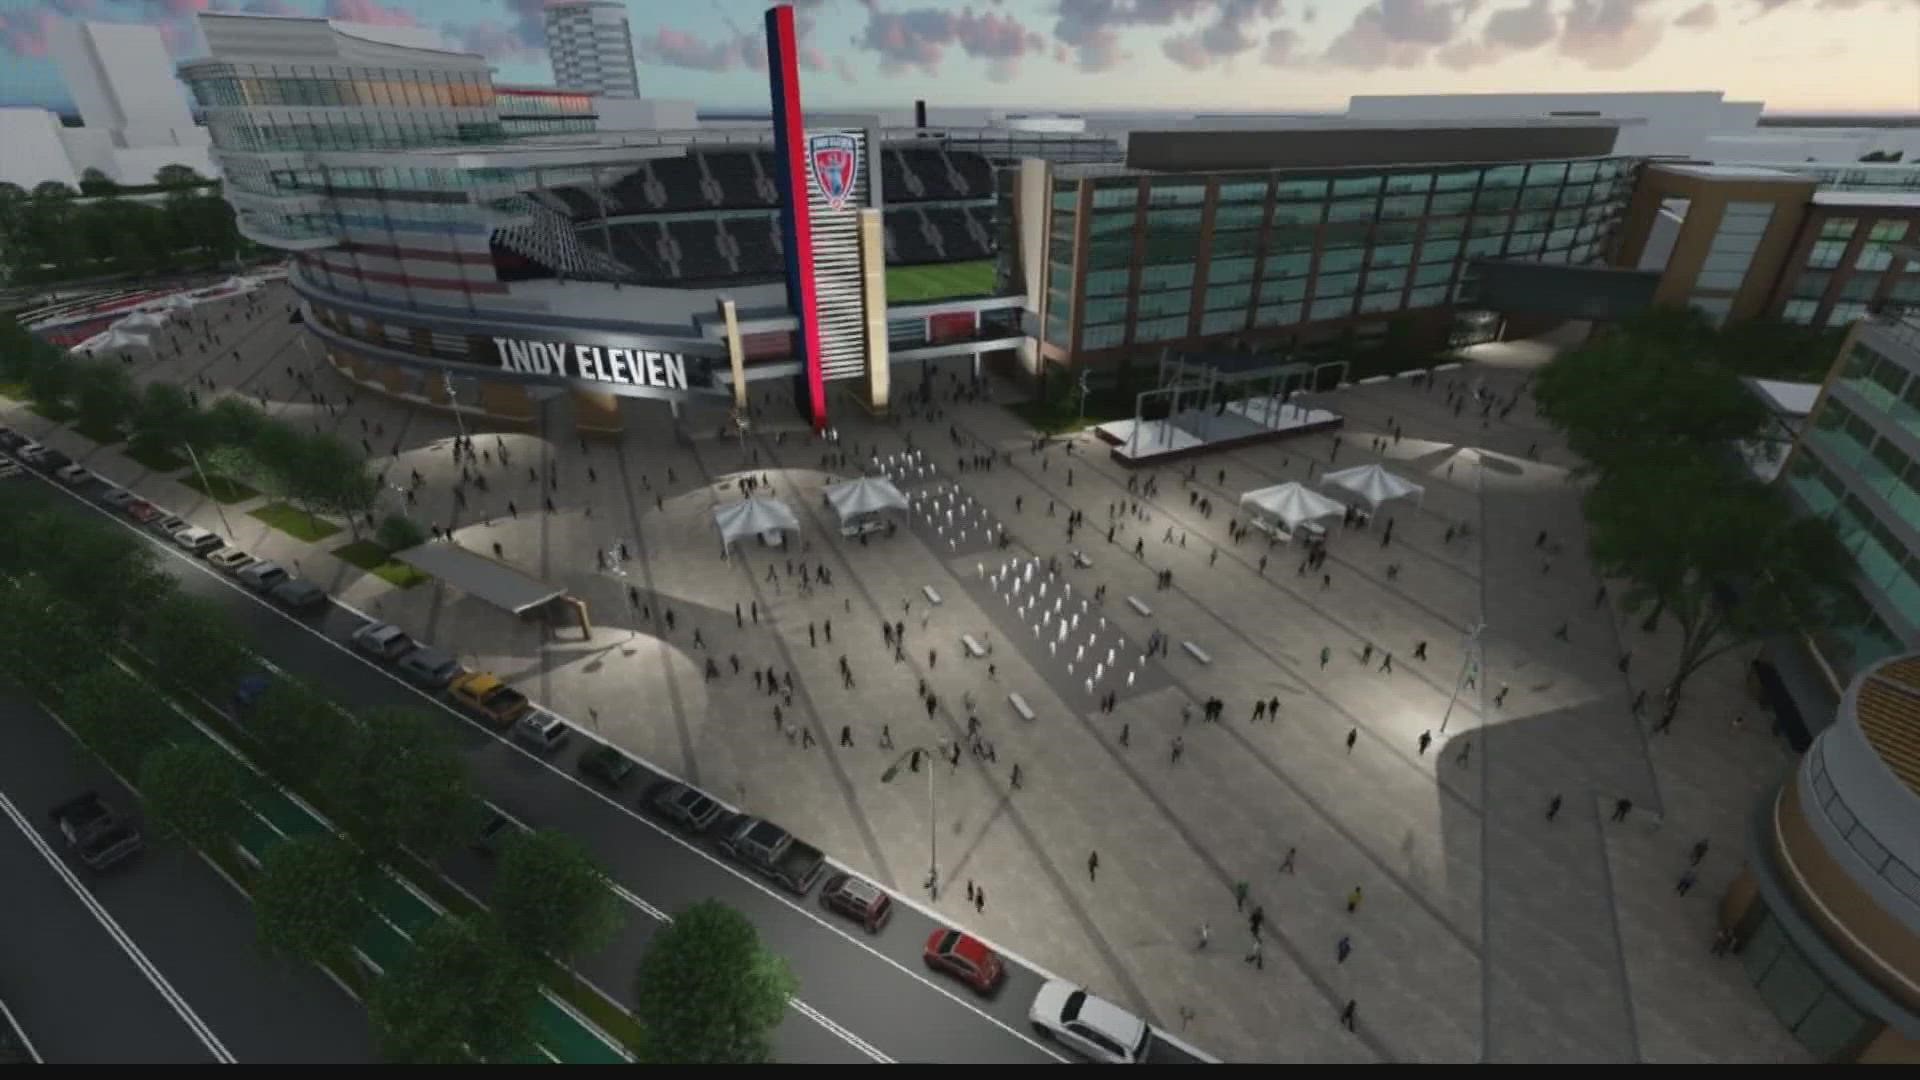 The Indy Eleven will break ground next year on a soccer park downtown, including a new stadium for the team.